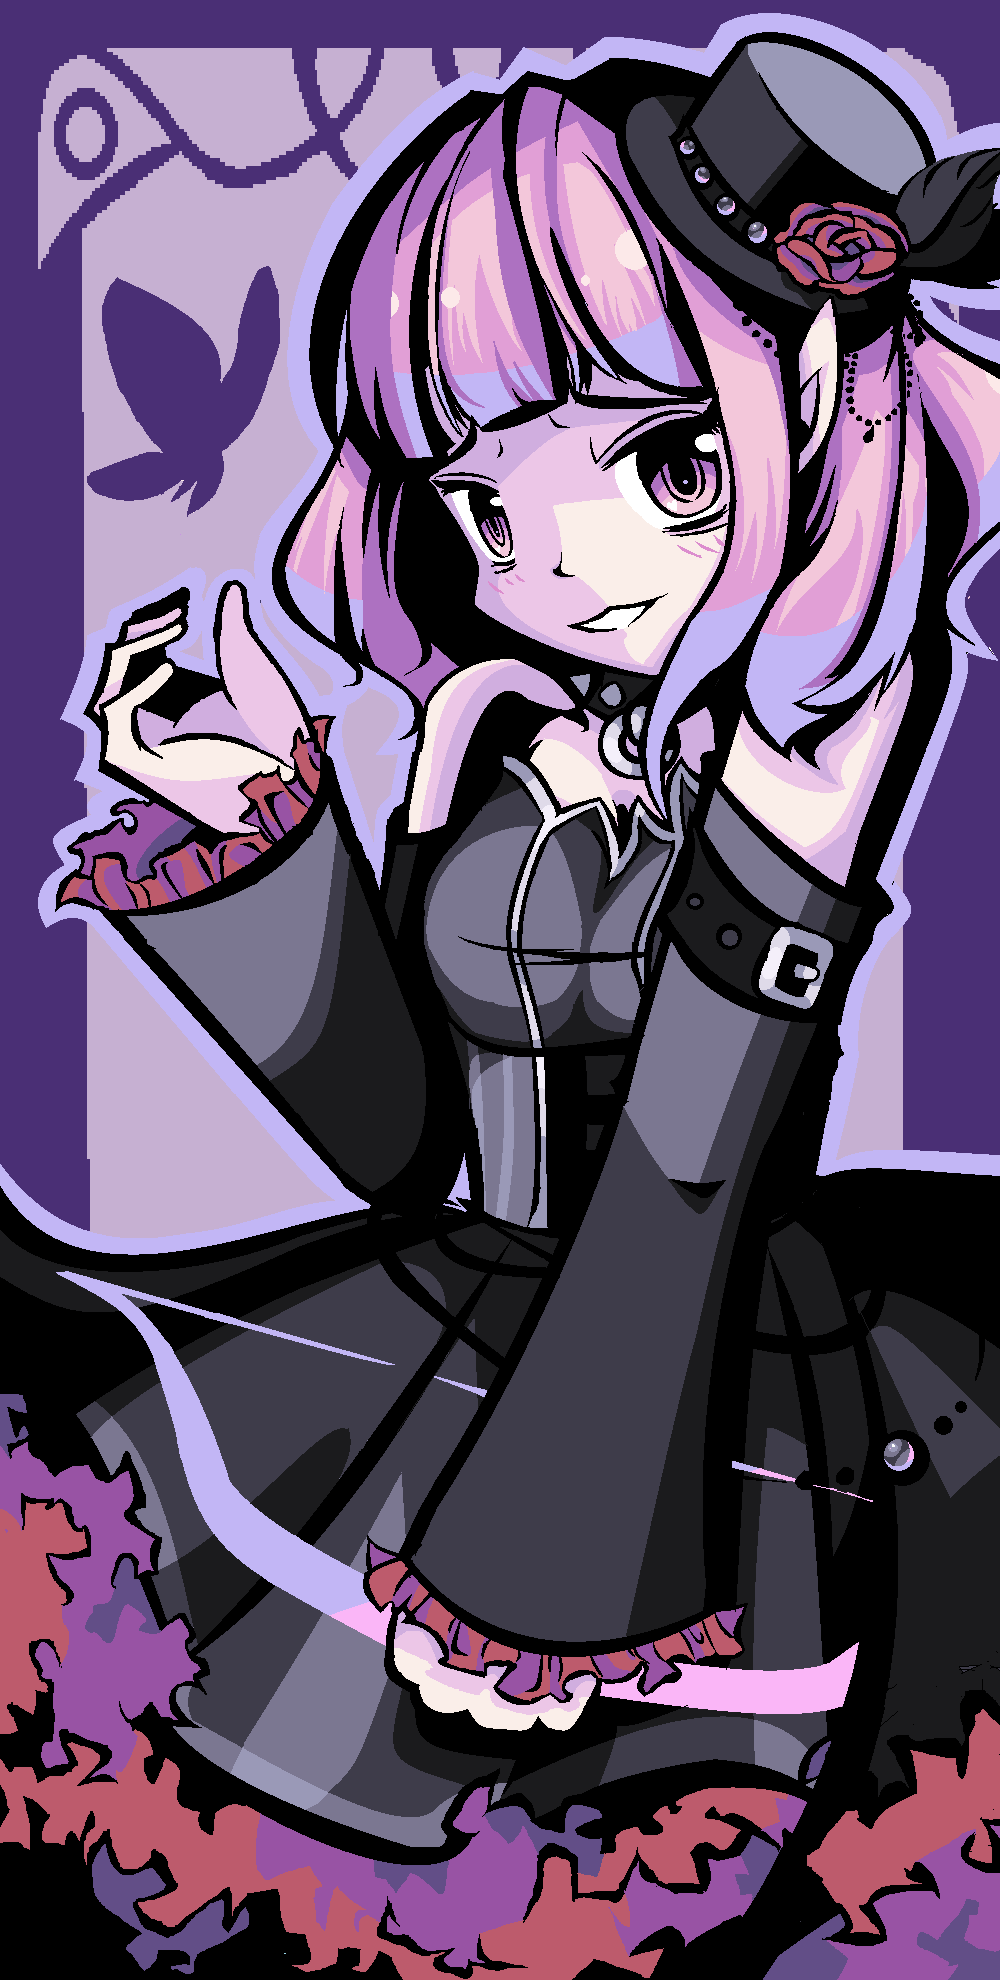 lucid_by_kittystar123-dbbgz57.png